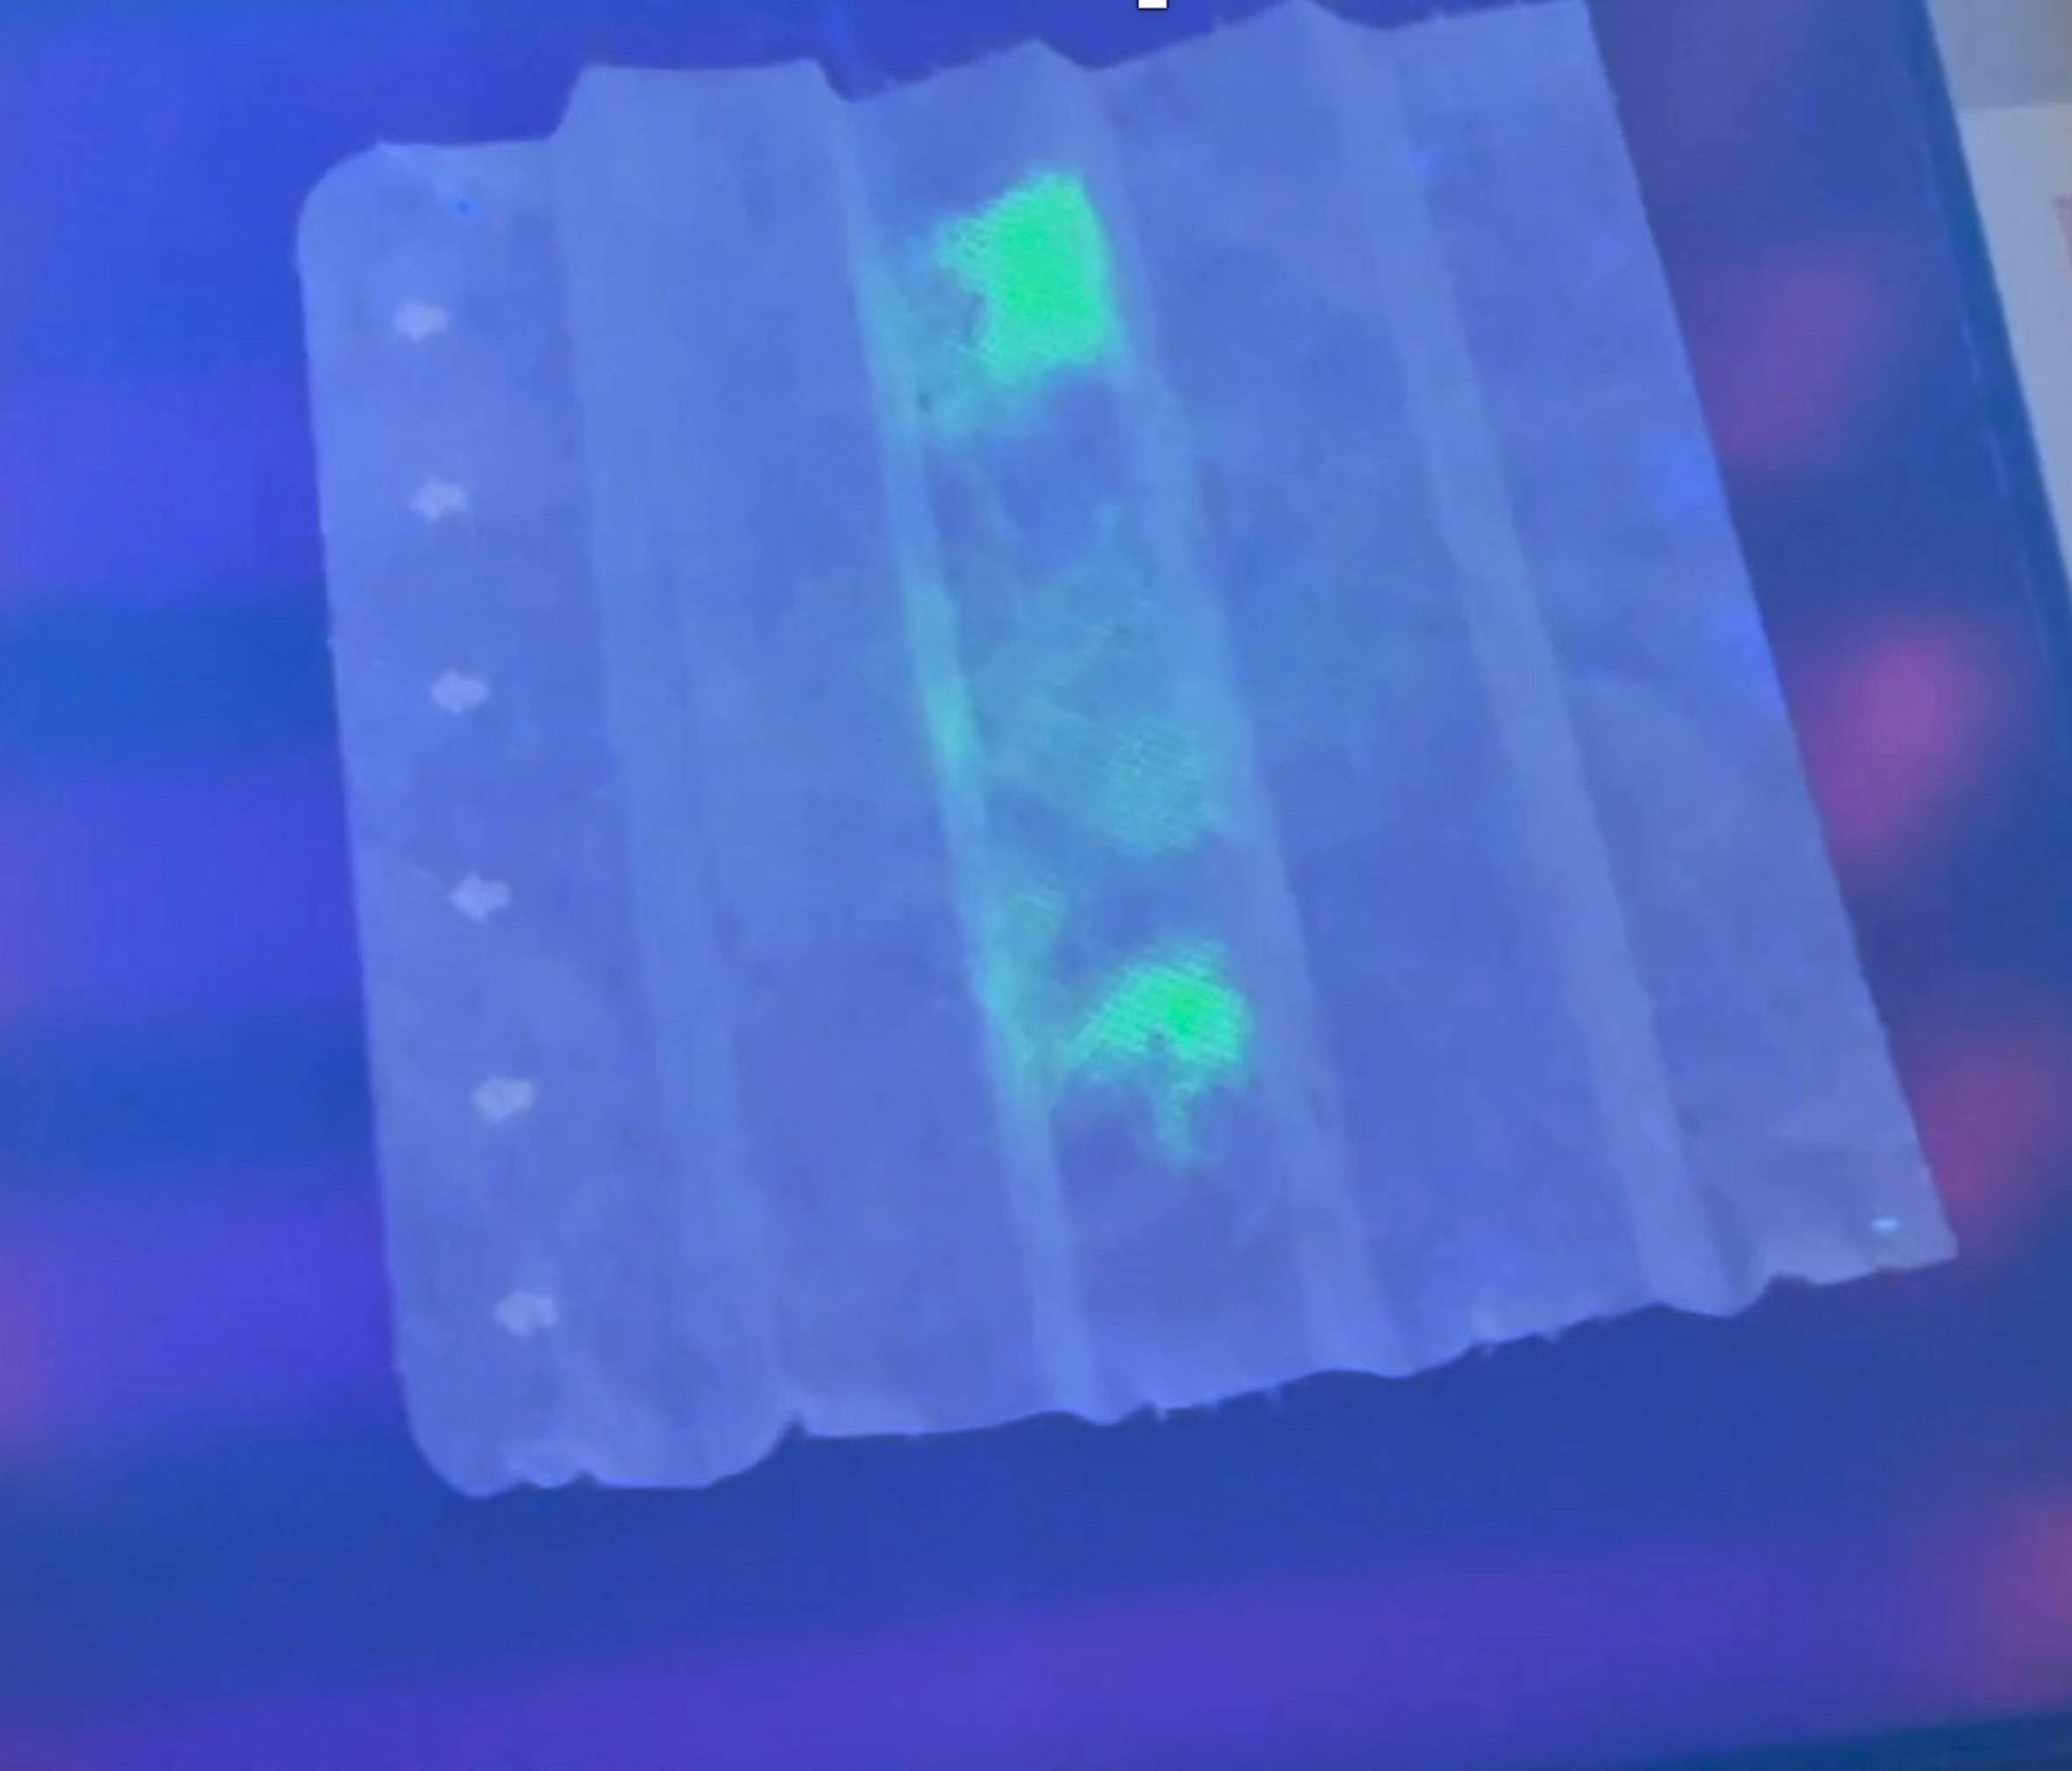 Fabric with glowing coronavirus particles